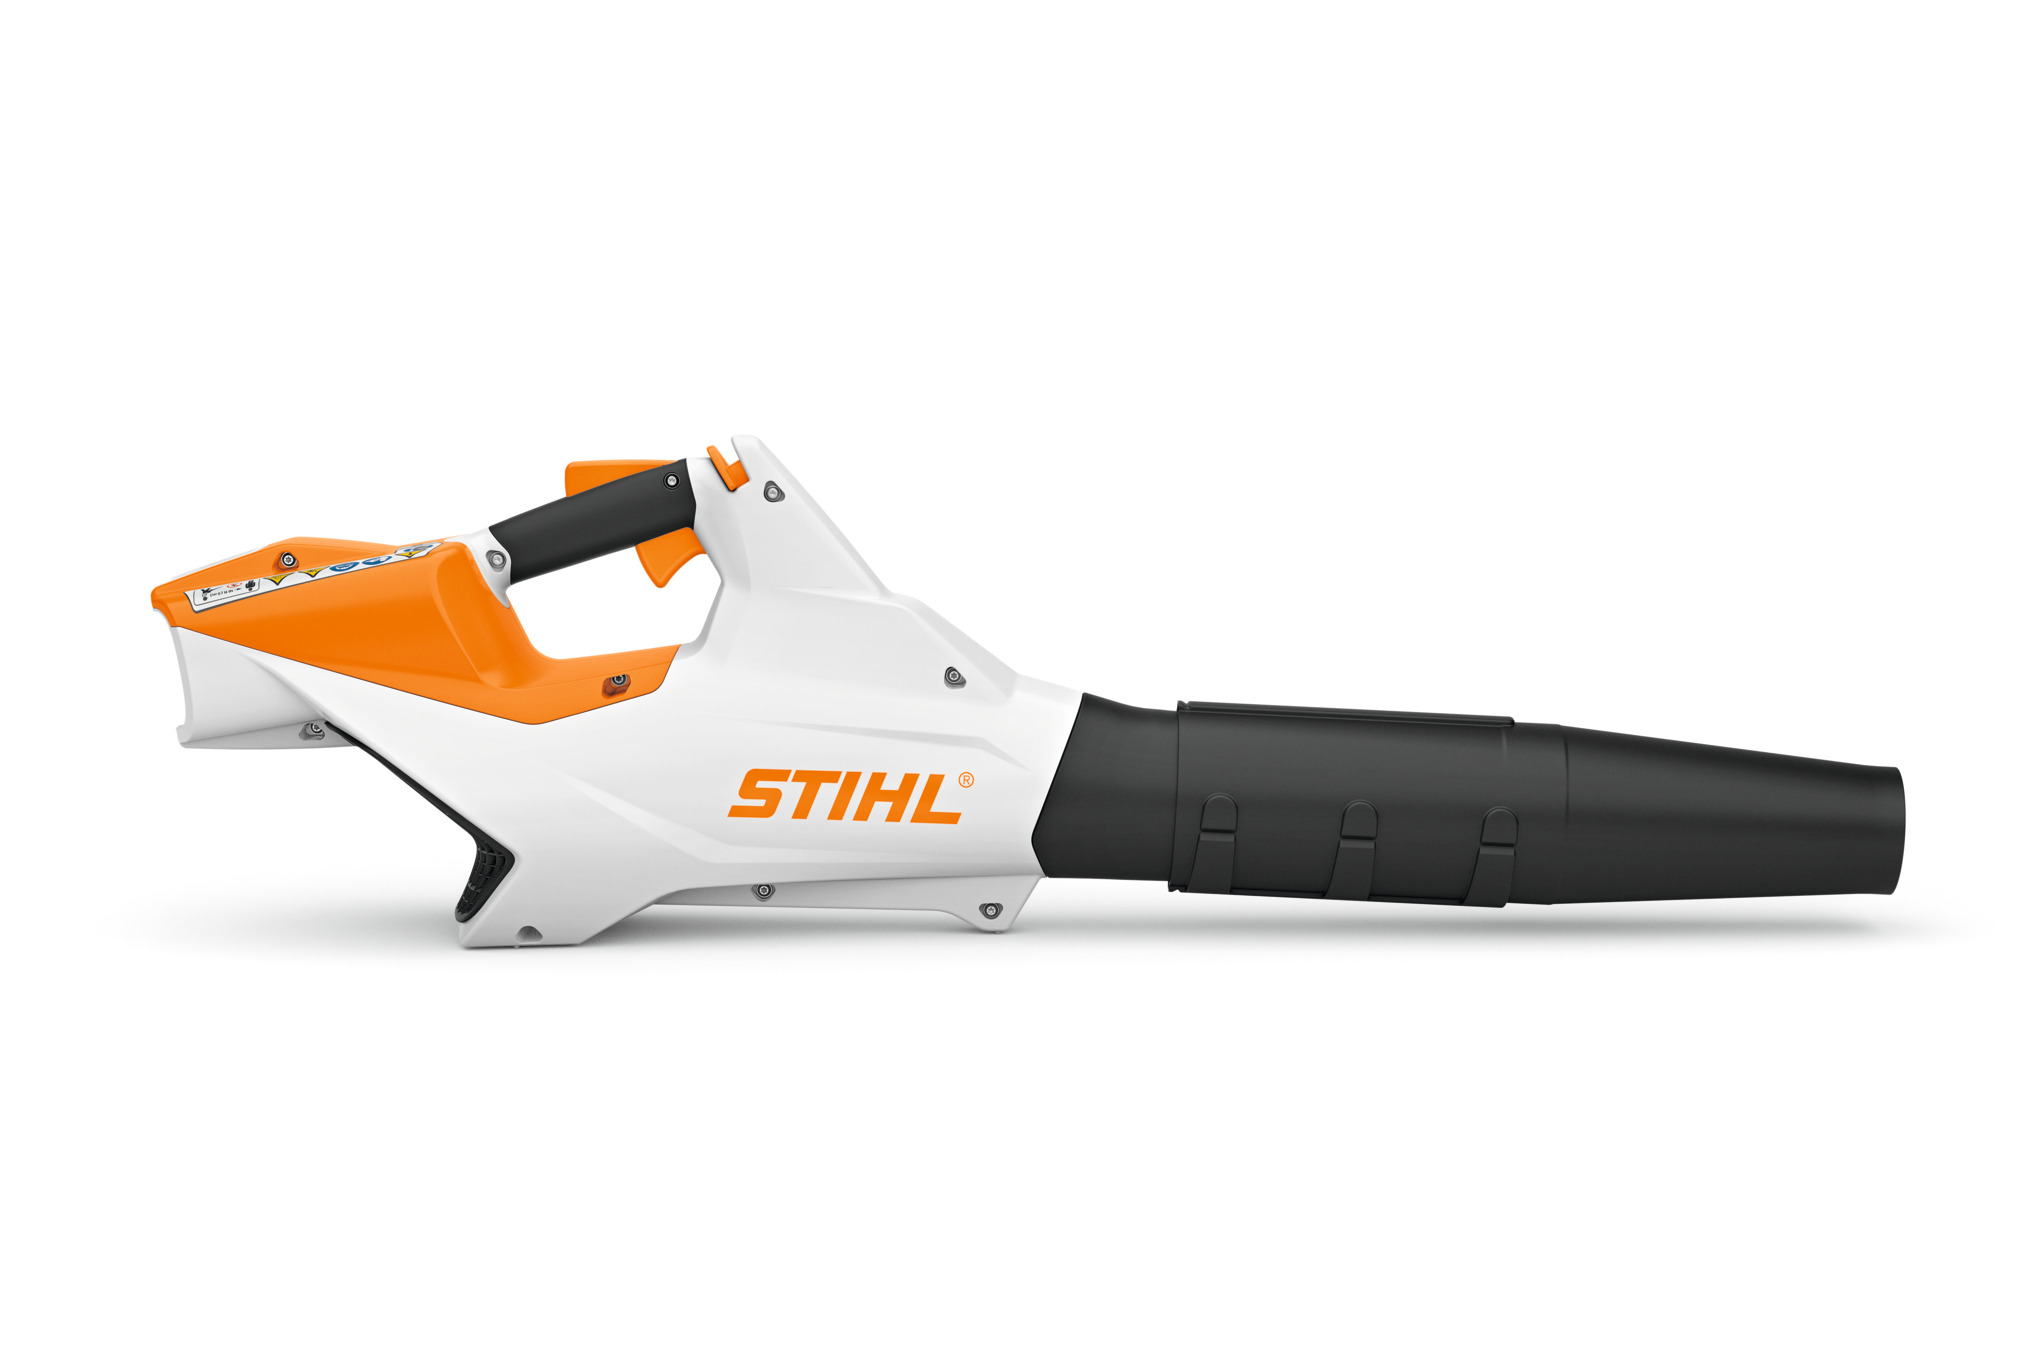 STIHL BGA 86 blower from the AP-System